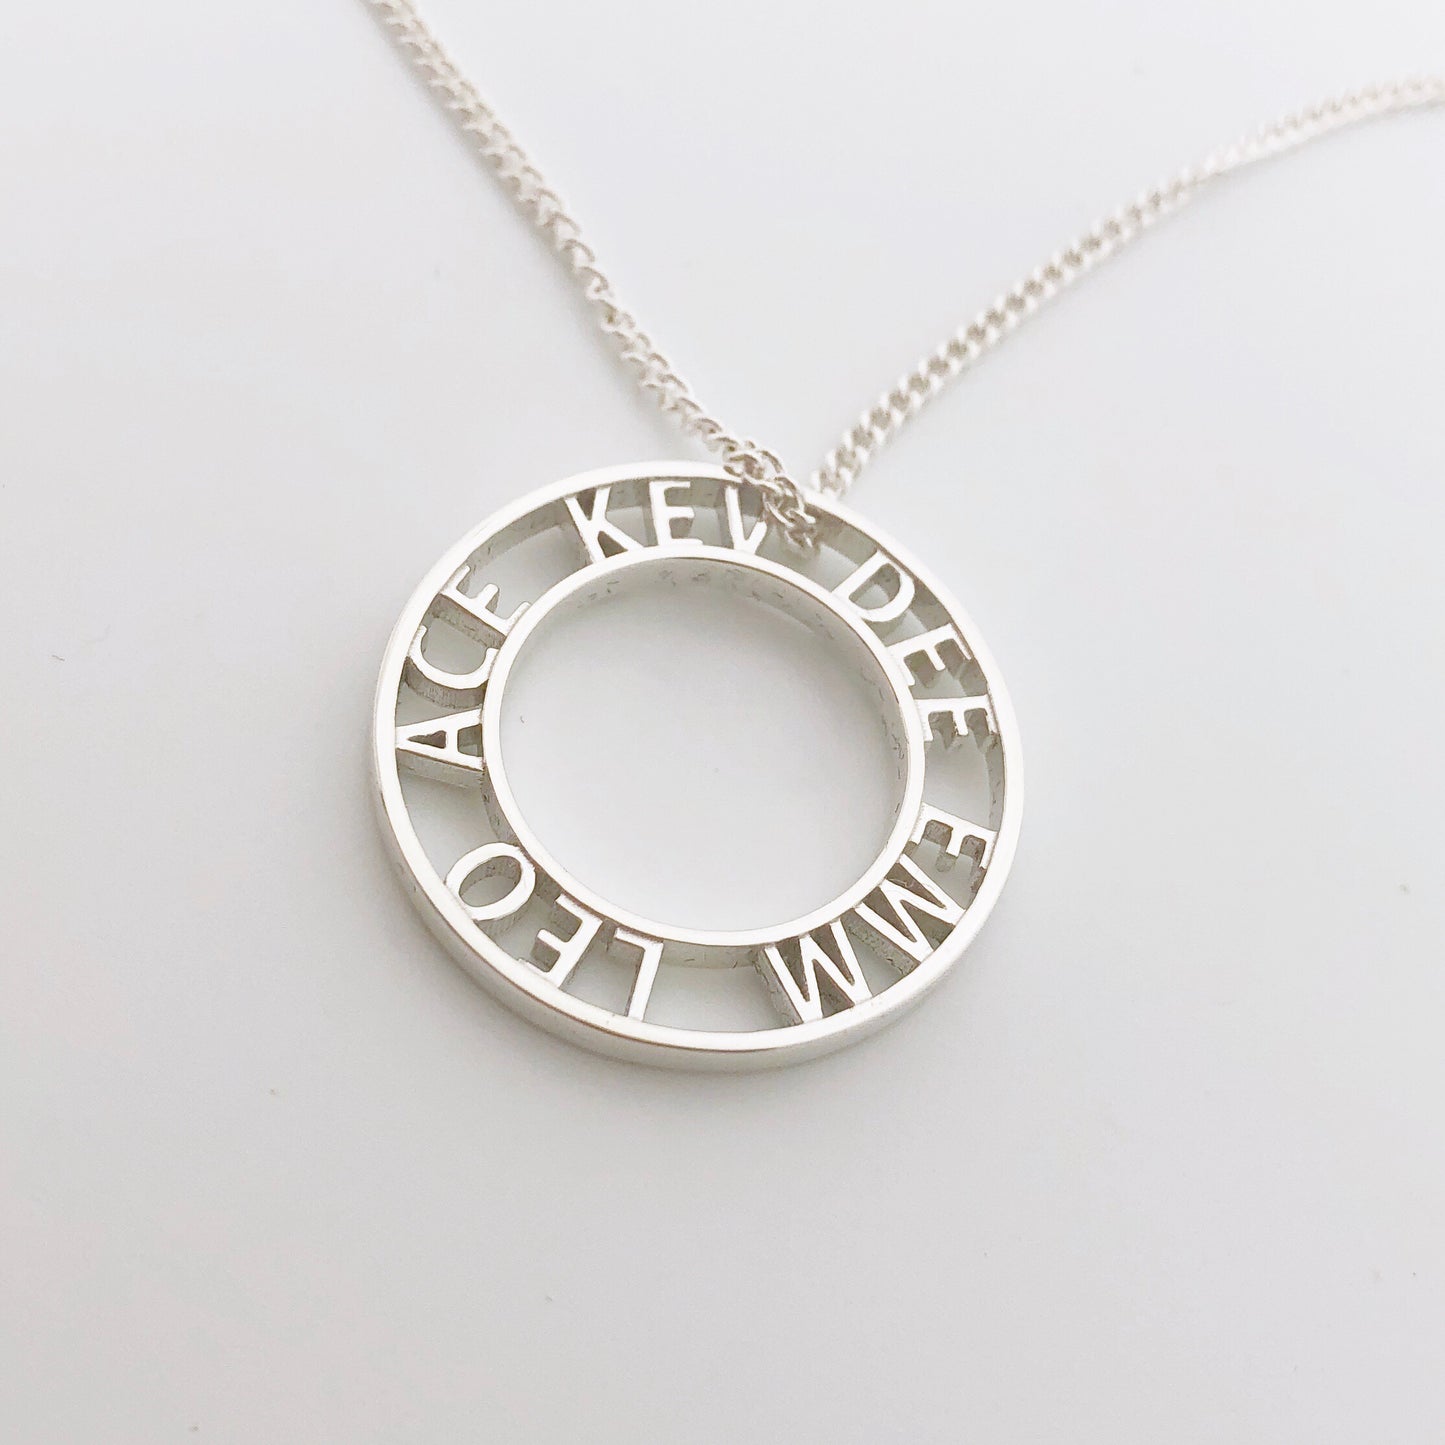 sterling silver personalised name necklace nz